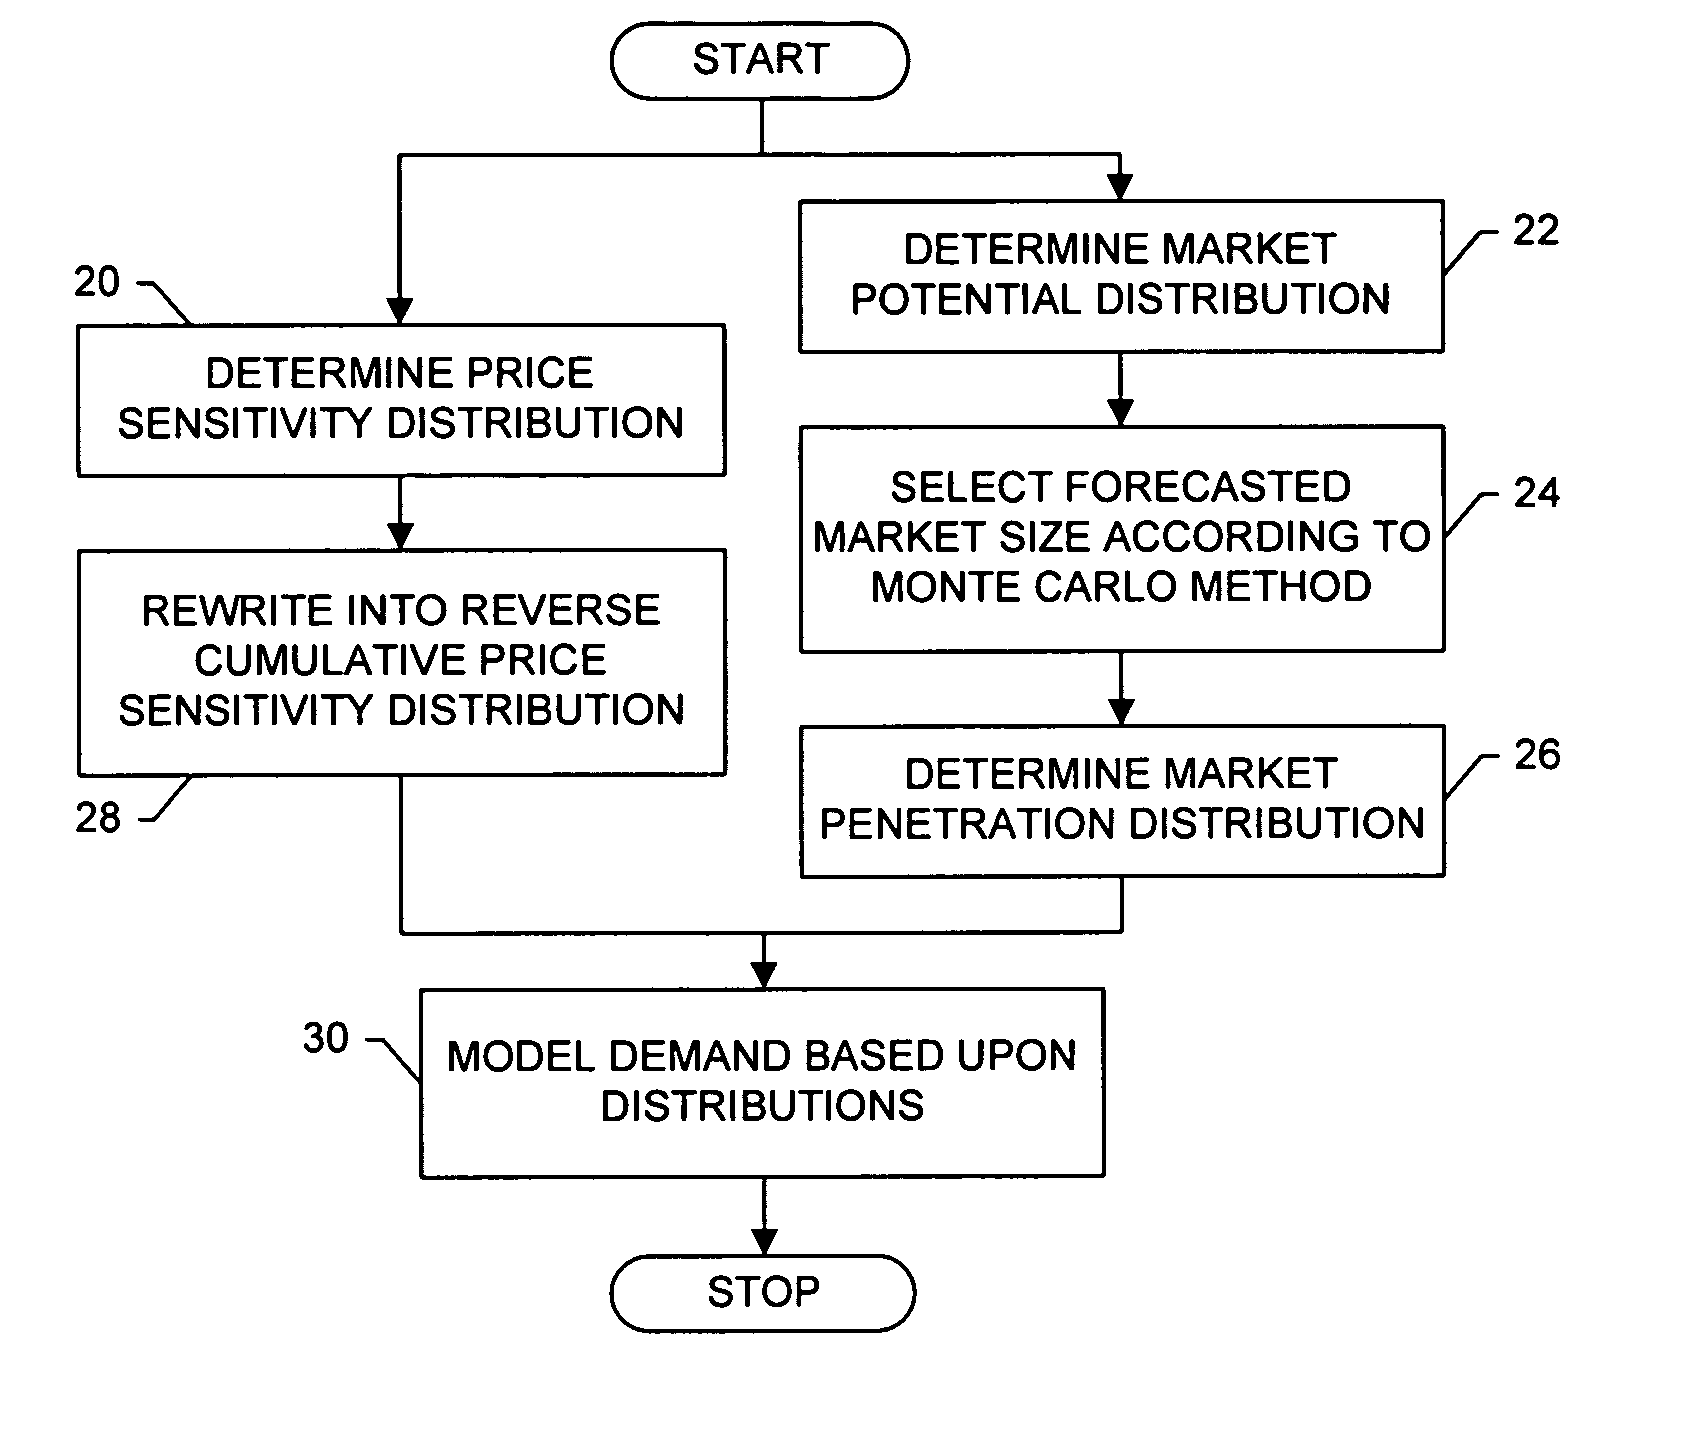 Systems, methods and computer program products for modeling demand, supply and associated profitability of a good in an aggregate market